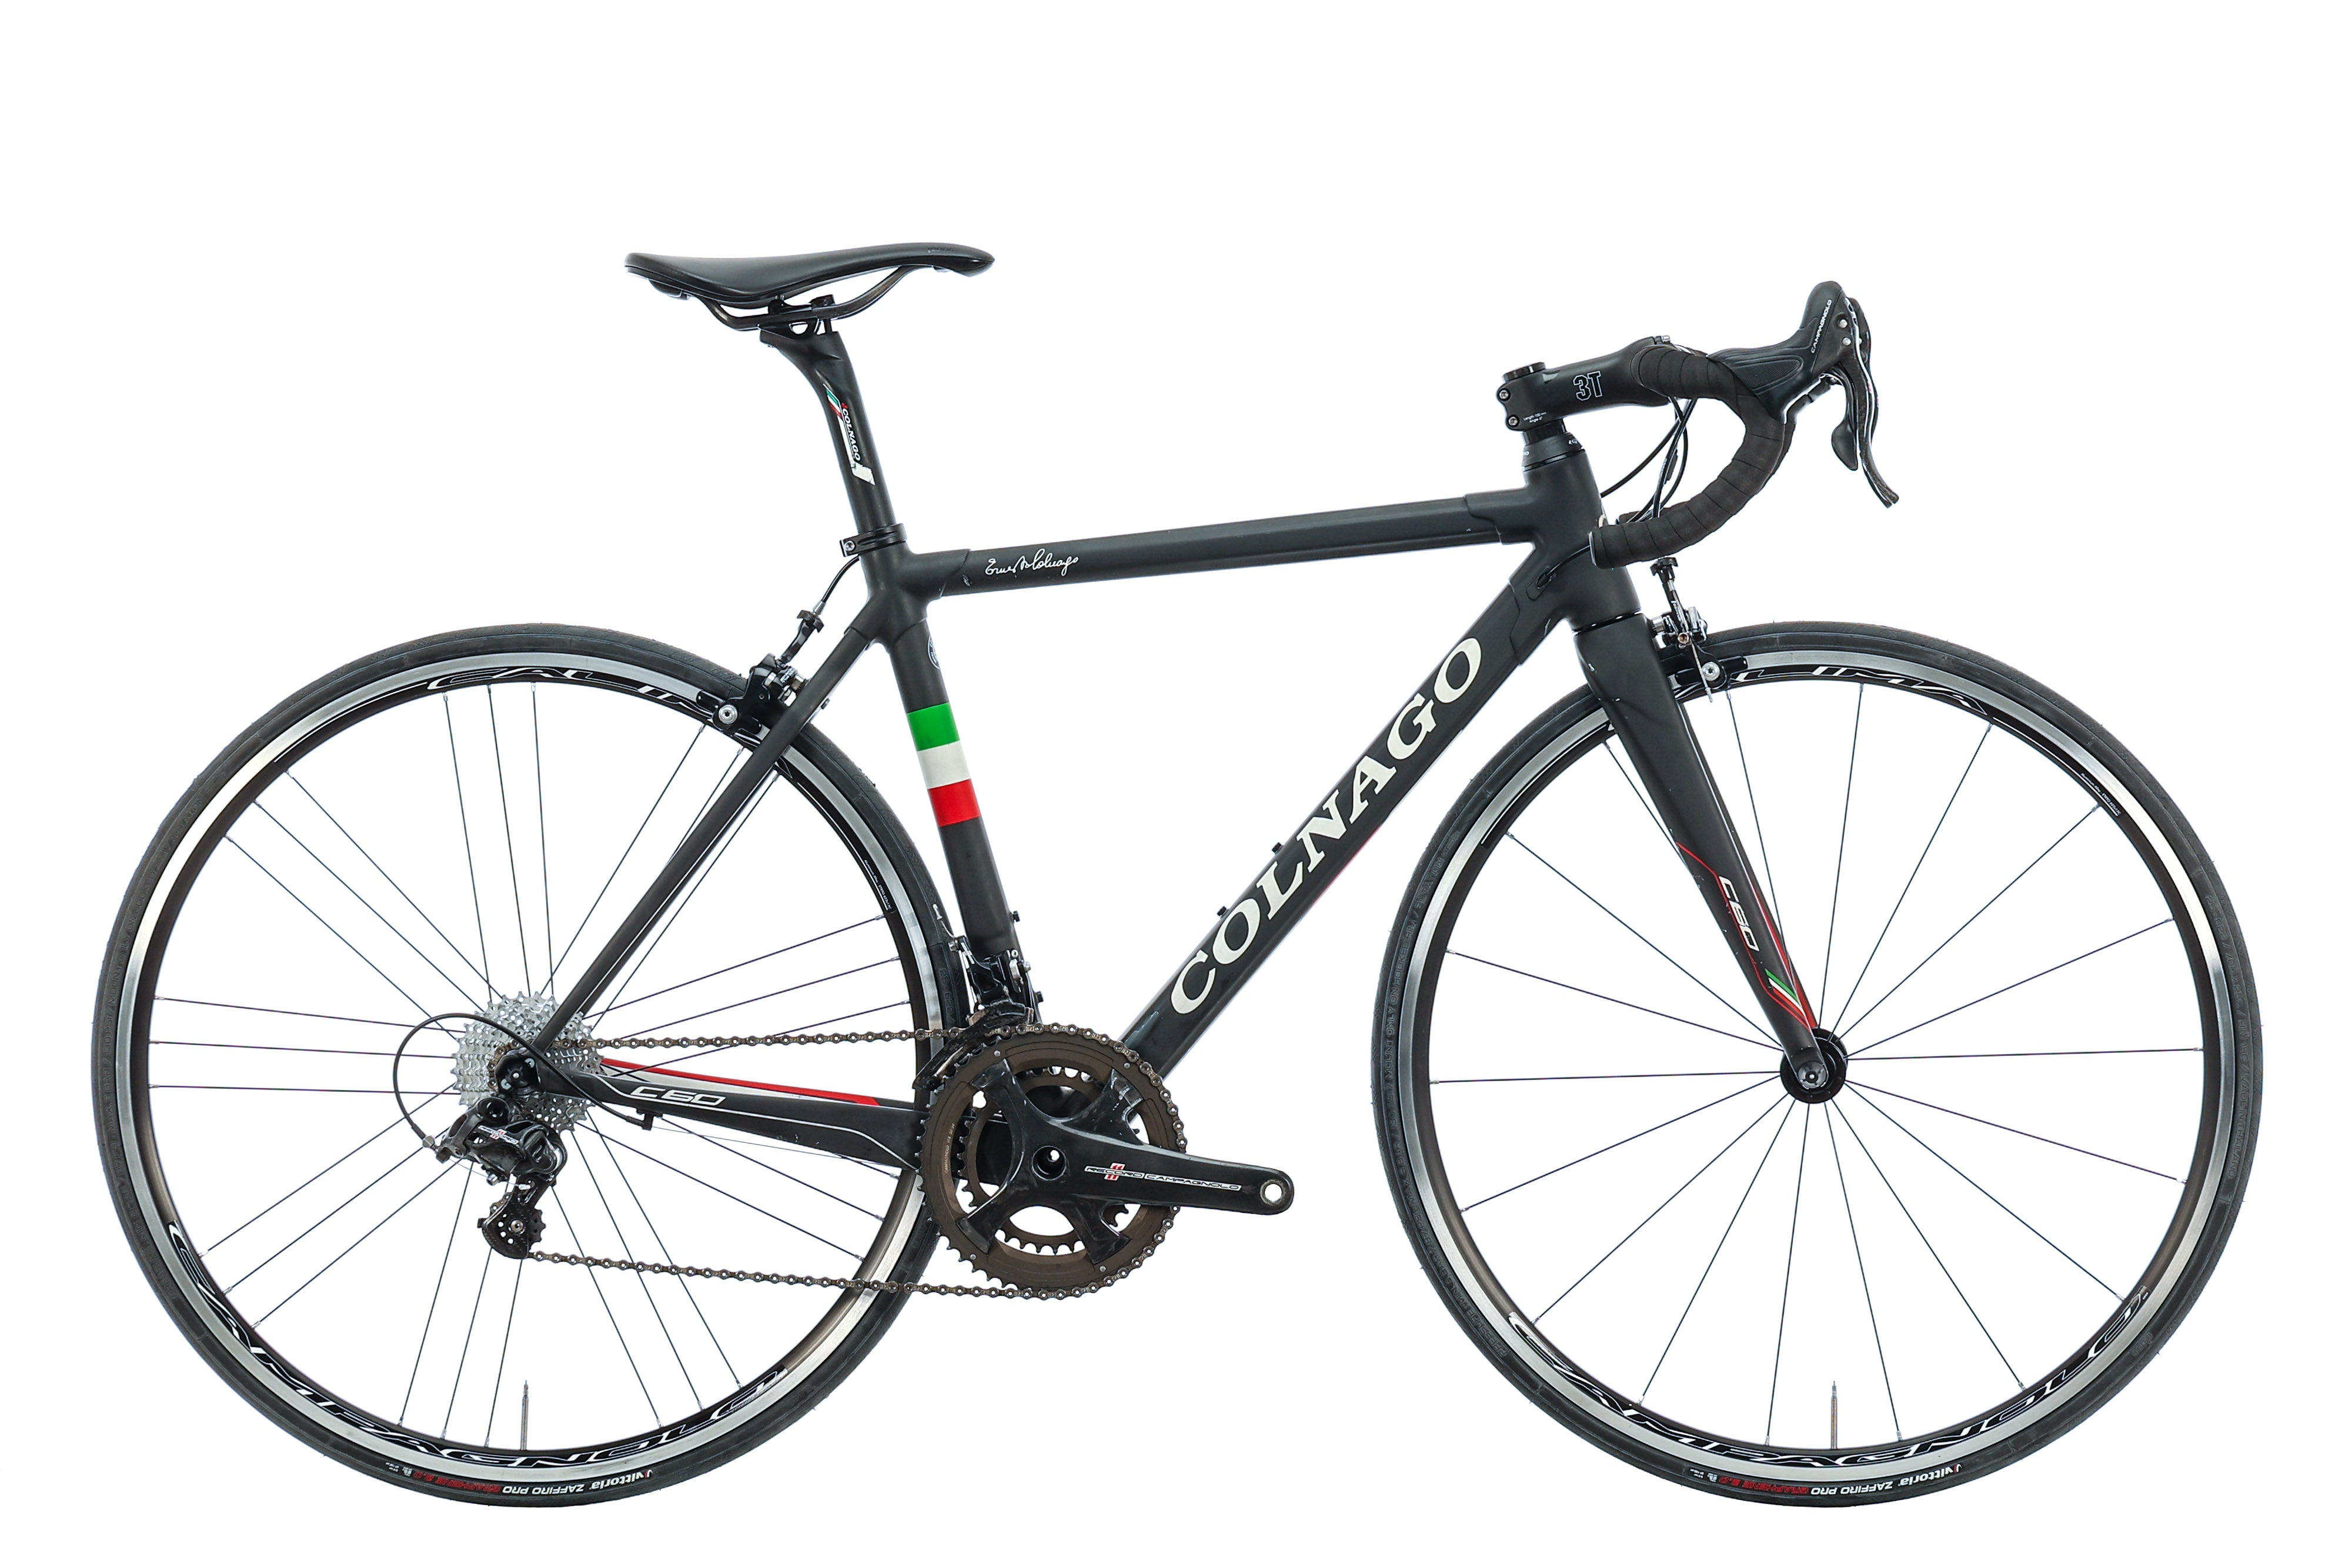 New and Used Colnago Bikes For Sale Colnago Steel Bikes The Pros Closet